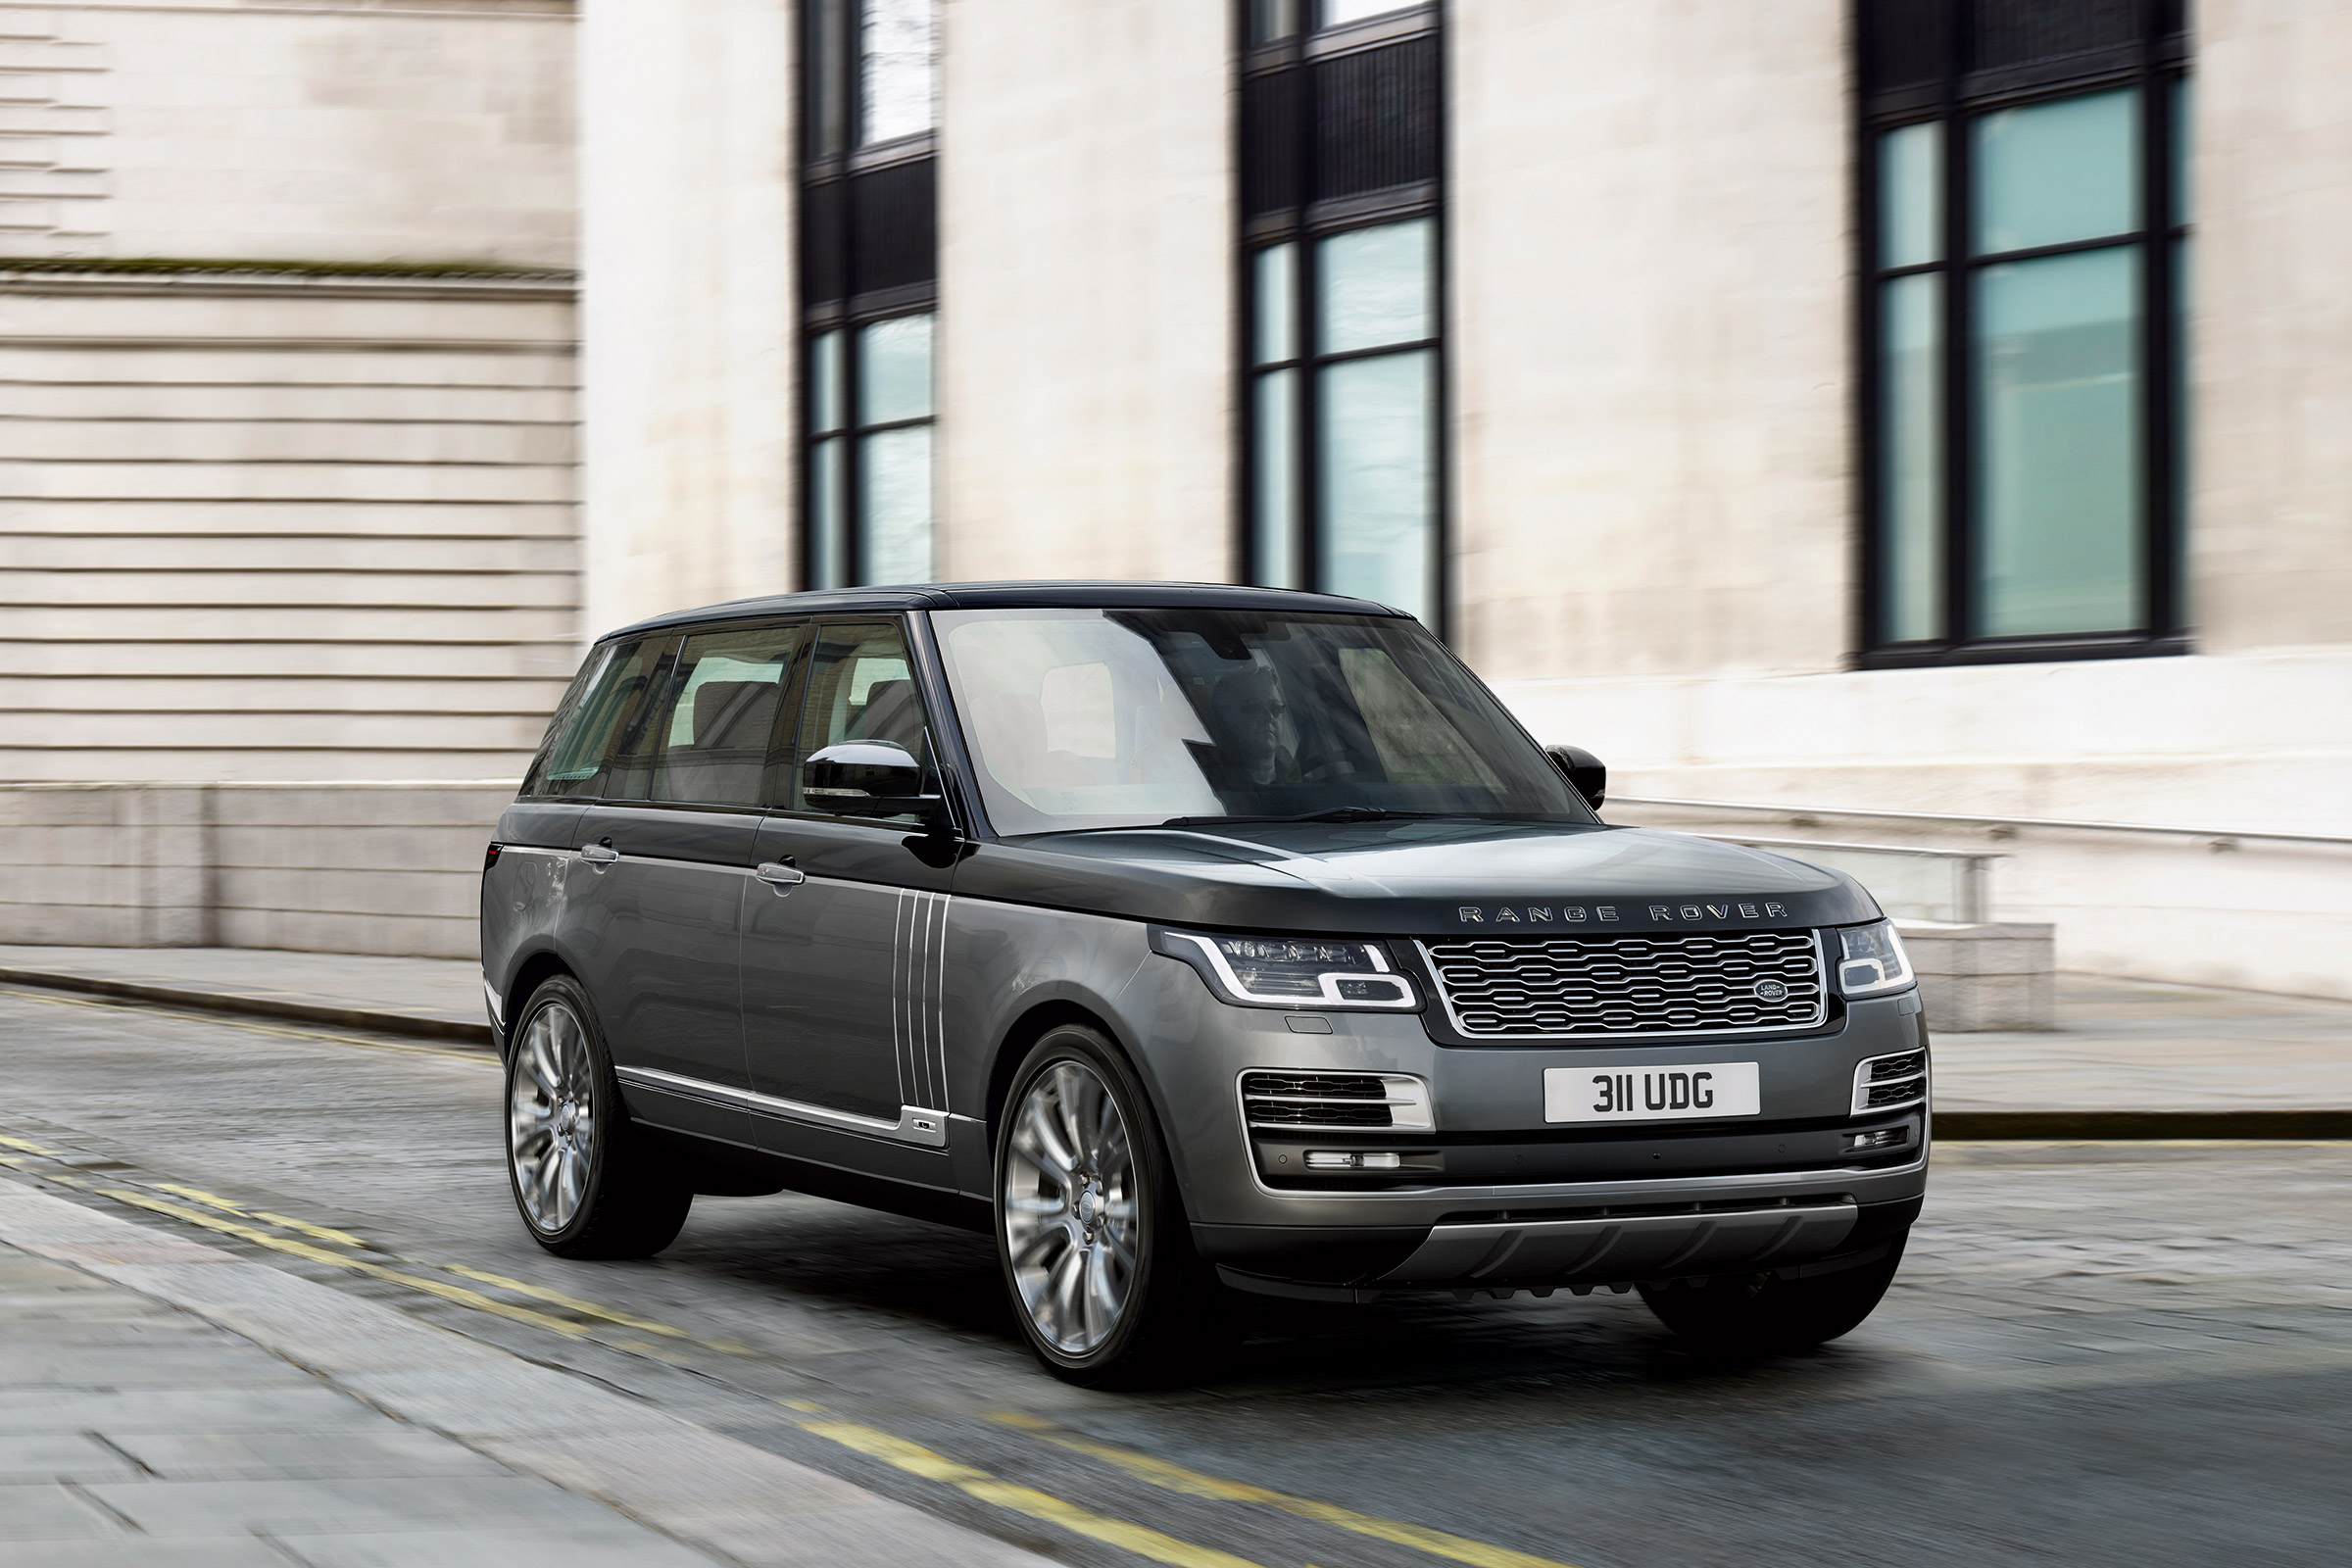 Top spec Range Rover SVAutobiography revealed with £170k starting price ...